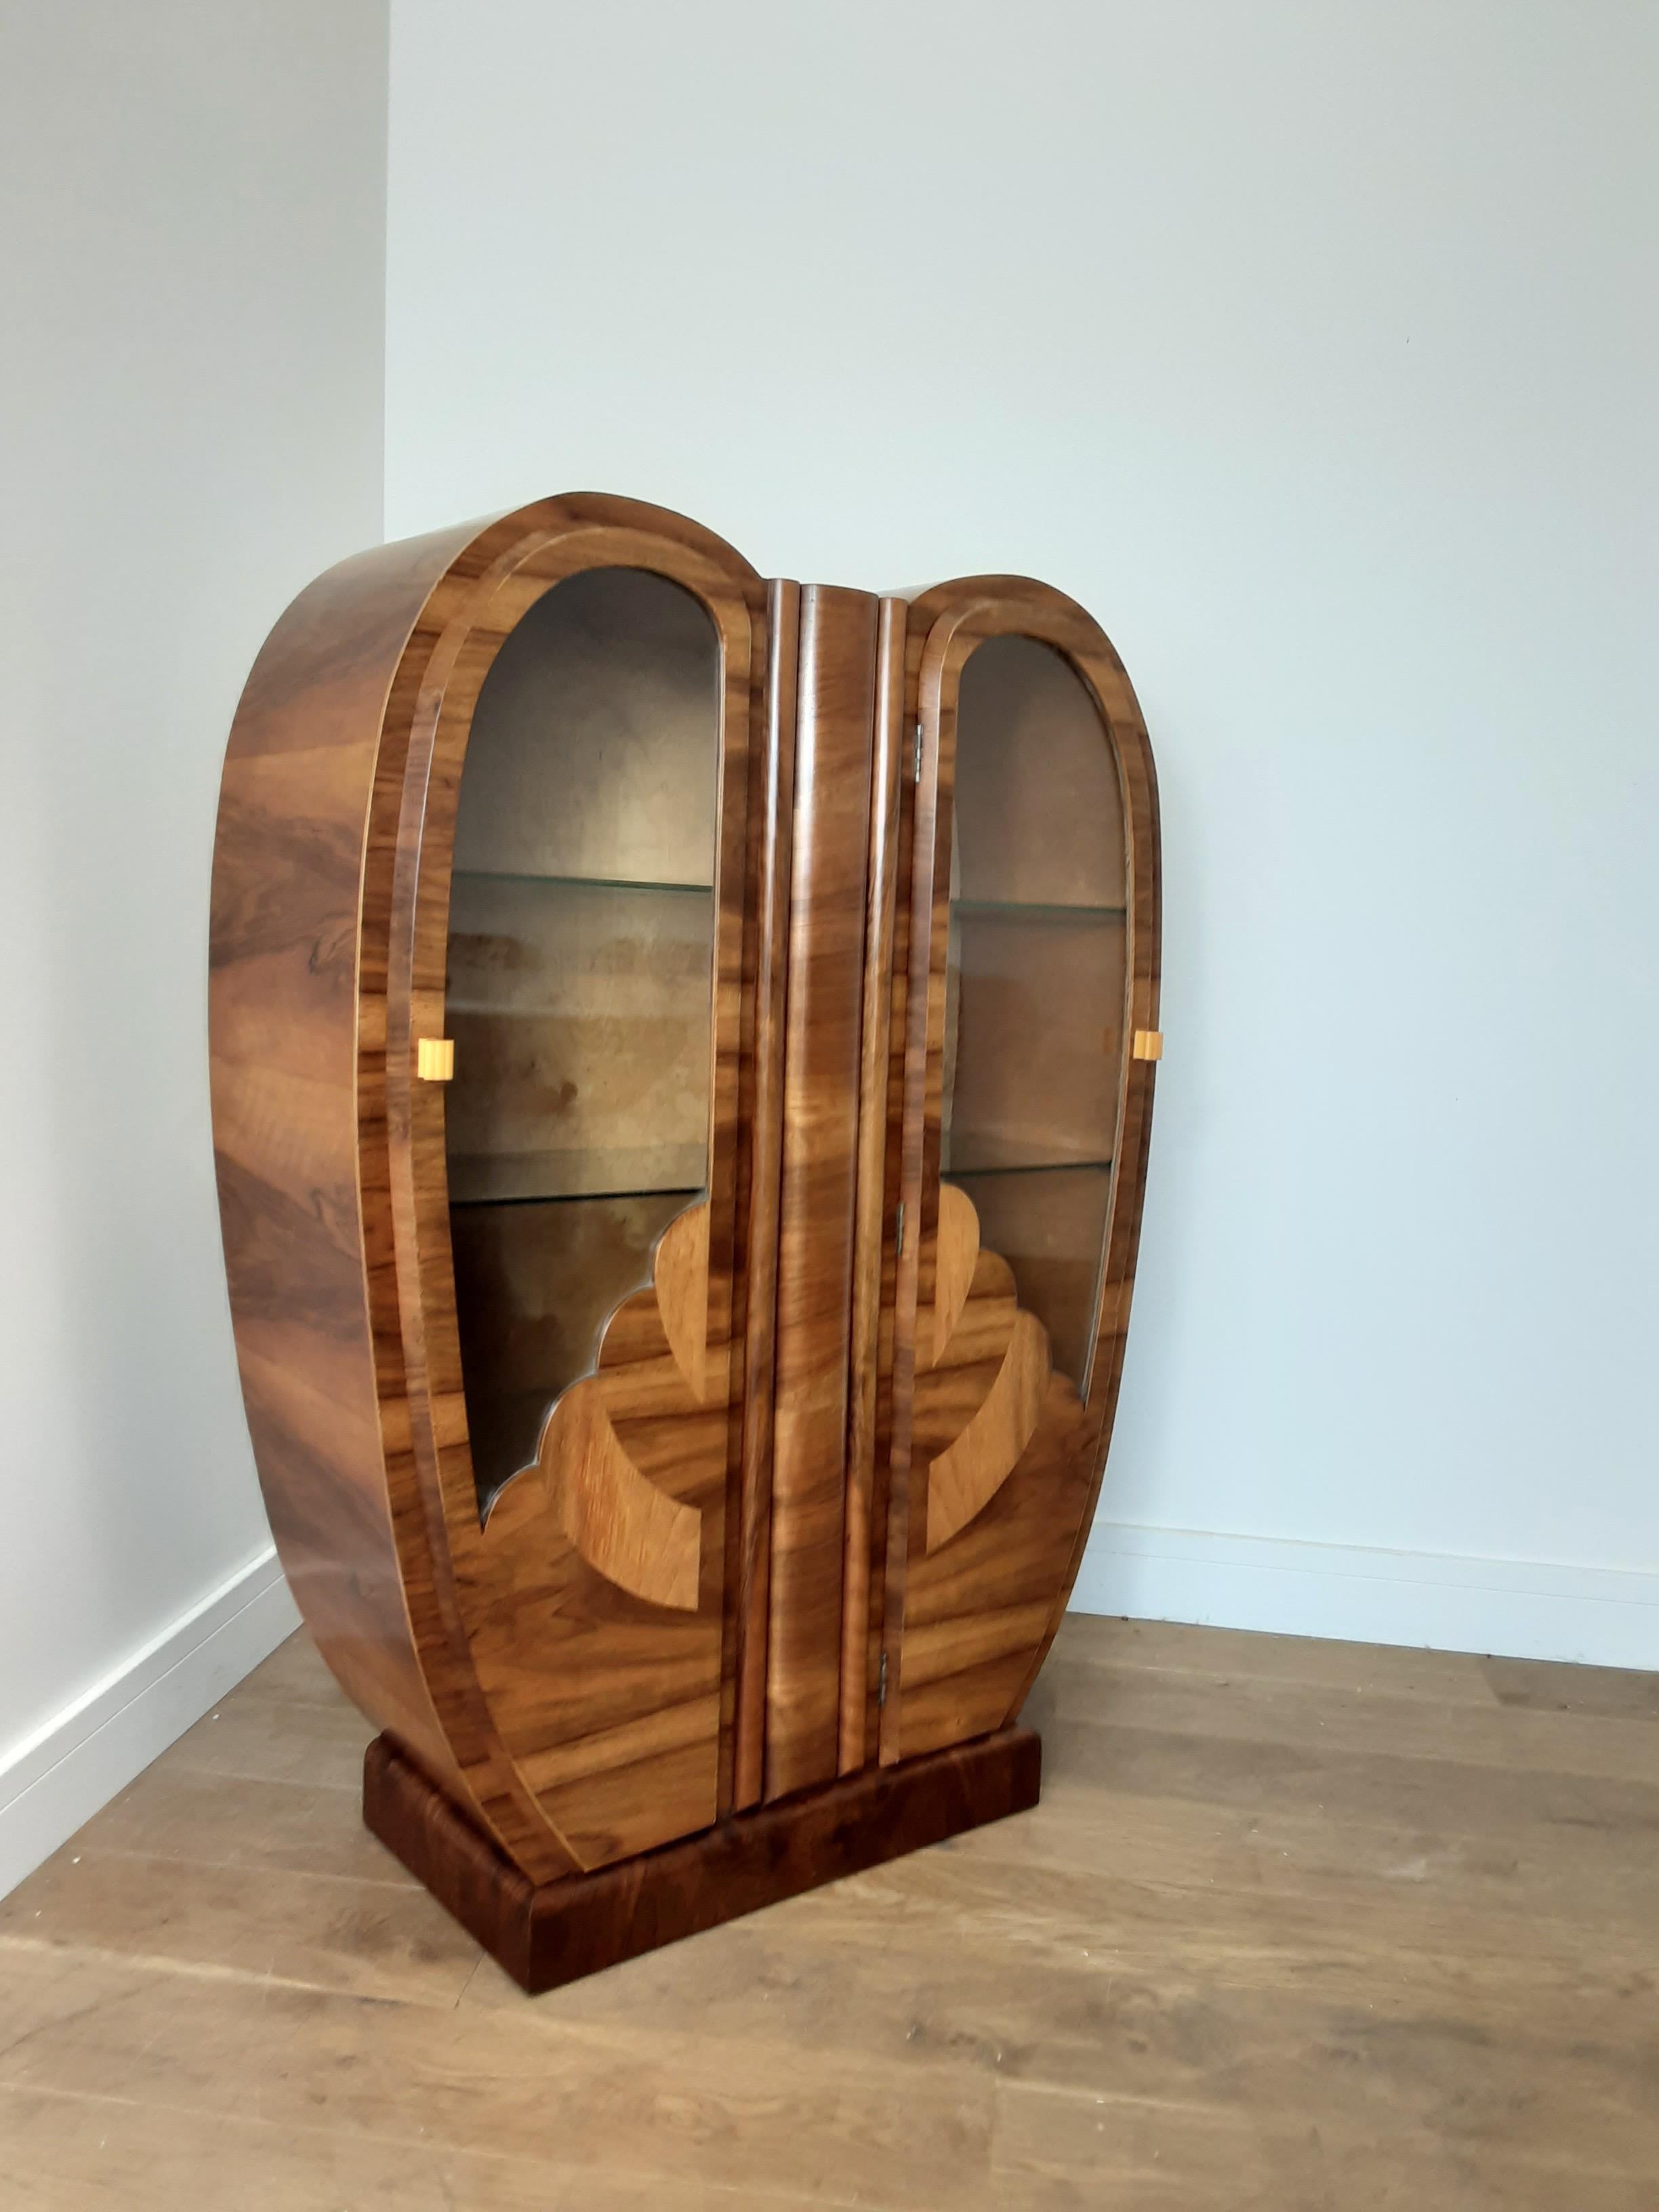 Art Deco display cabinet bookcase.
A rare cabinet in a heart shape with the most stunning walnut veneers giving a super ribbon effect, original bakelite handles.
Measures: 125 cm H 120 cm h in the centre, 90 cm W 37 cm D
British circa 1930
this